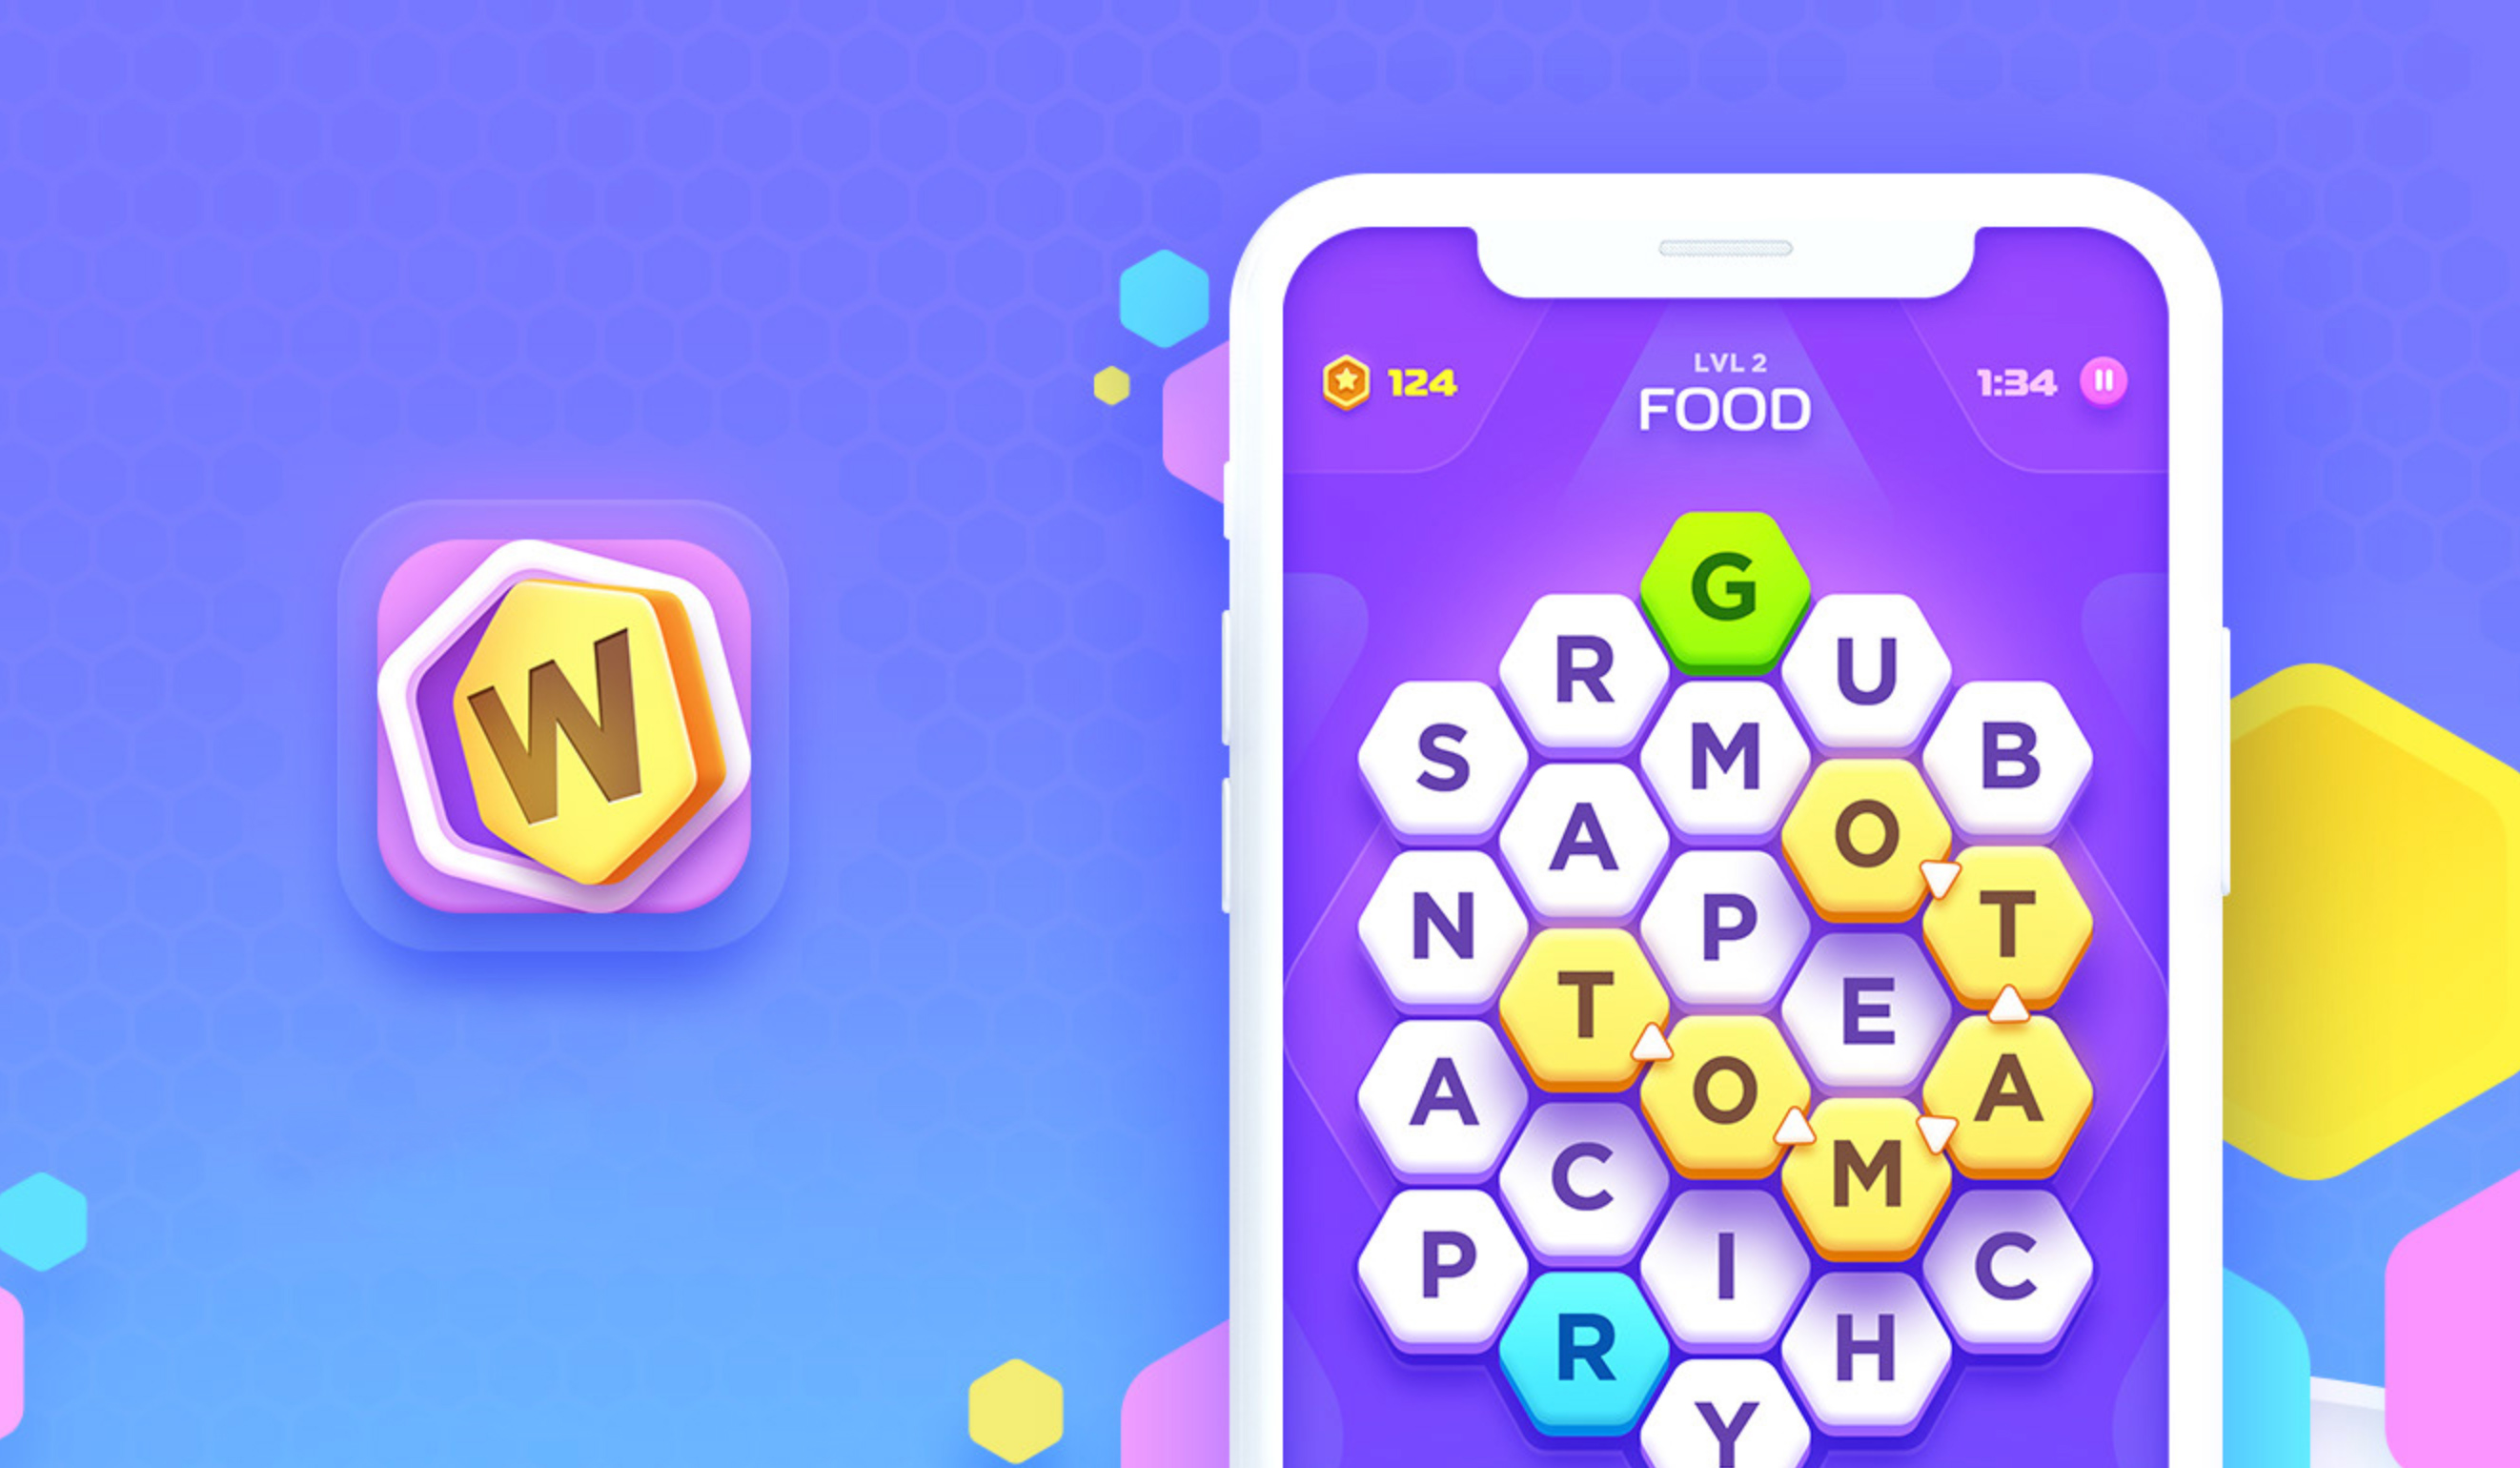 Game Design for the Colorful Word Galaxy